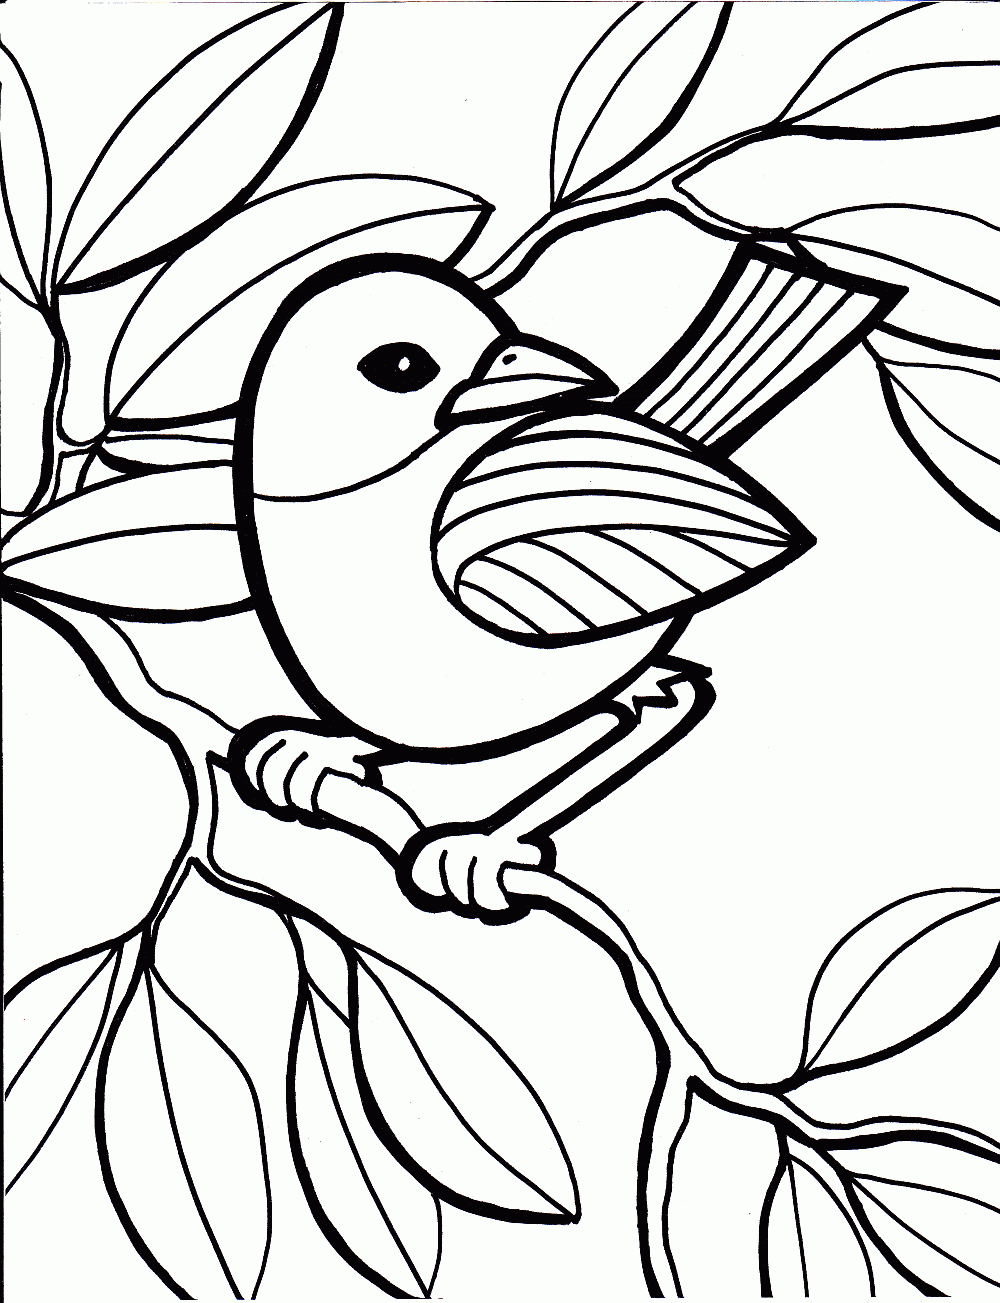 21-the-color-kids-free-coloring-pages